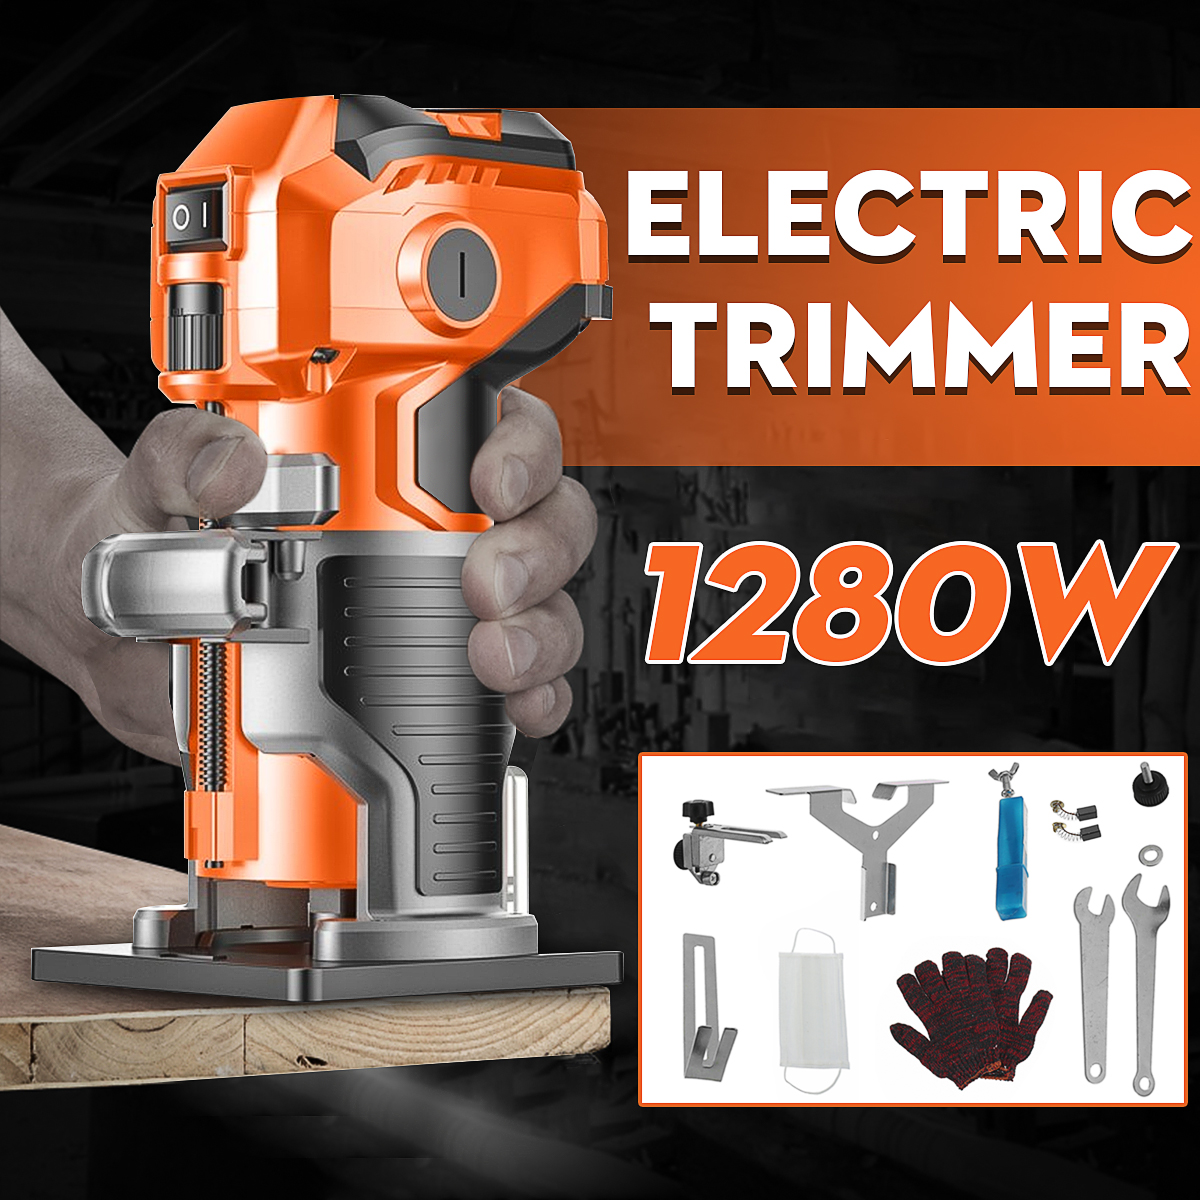 1280W-35000rmin-Electric-Hand-Trimmer-Wood-Laminator-Router-Edge-Joiners-Set-1541348-1